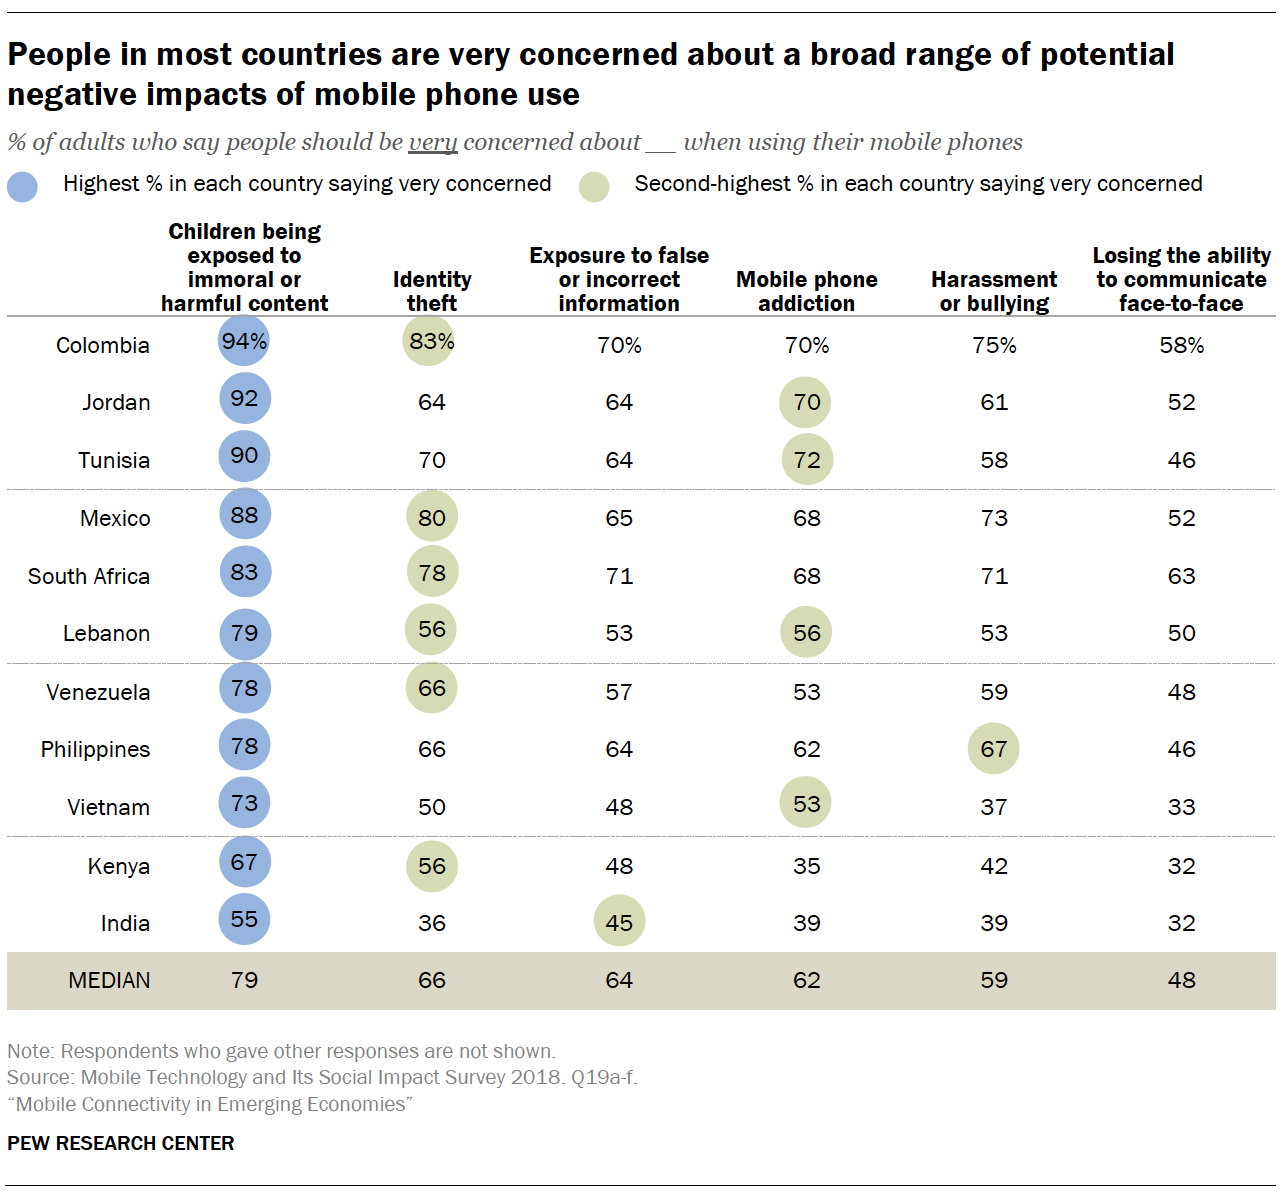 People in most countries are very concerned about a broad range of potential negative impacts of mobile phone use